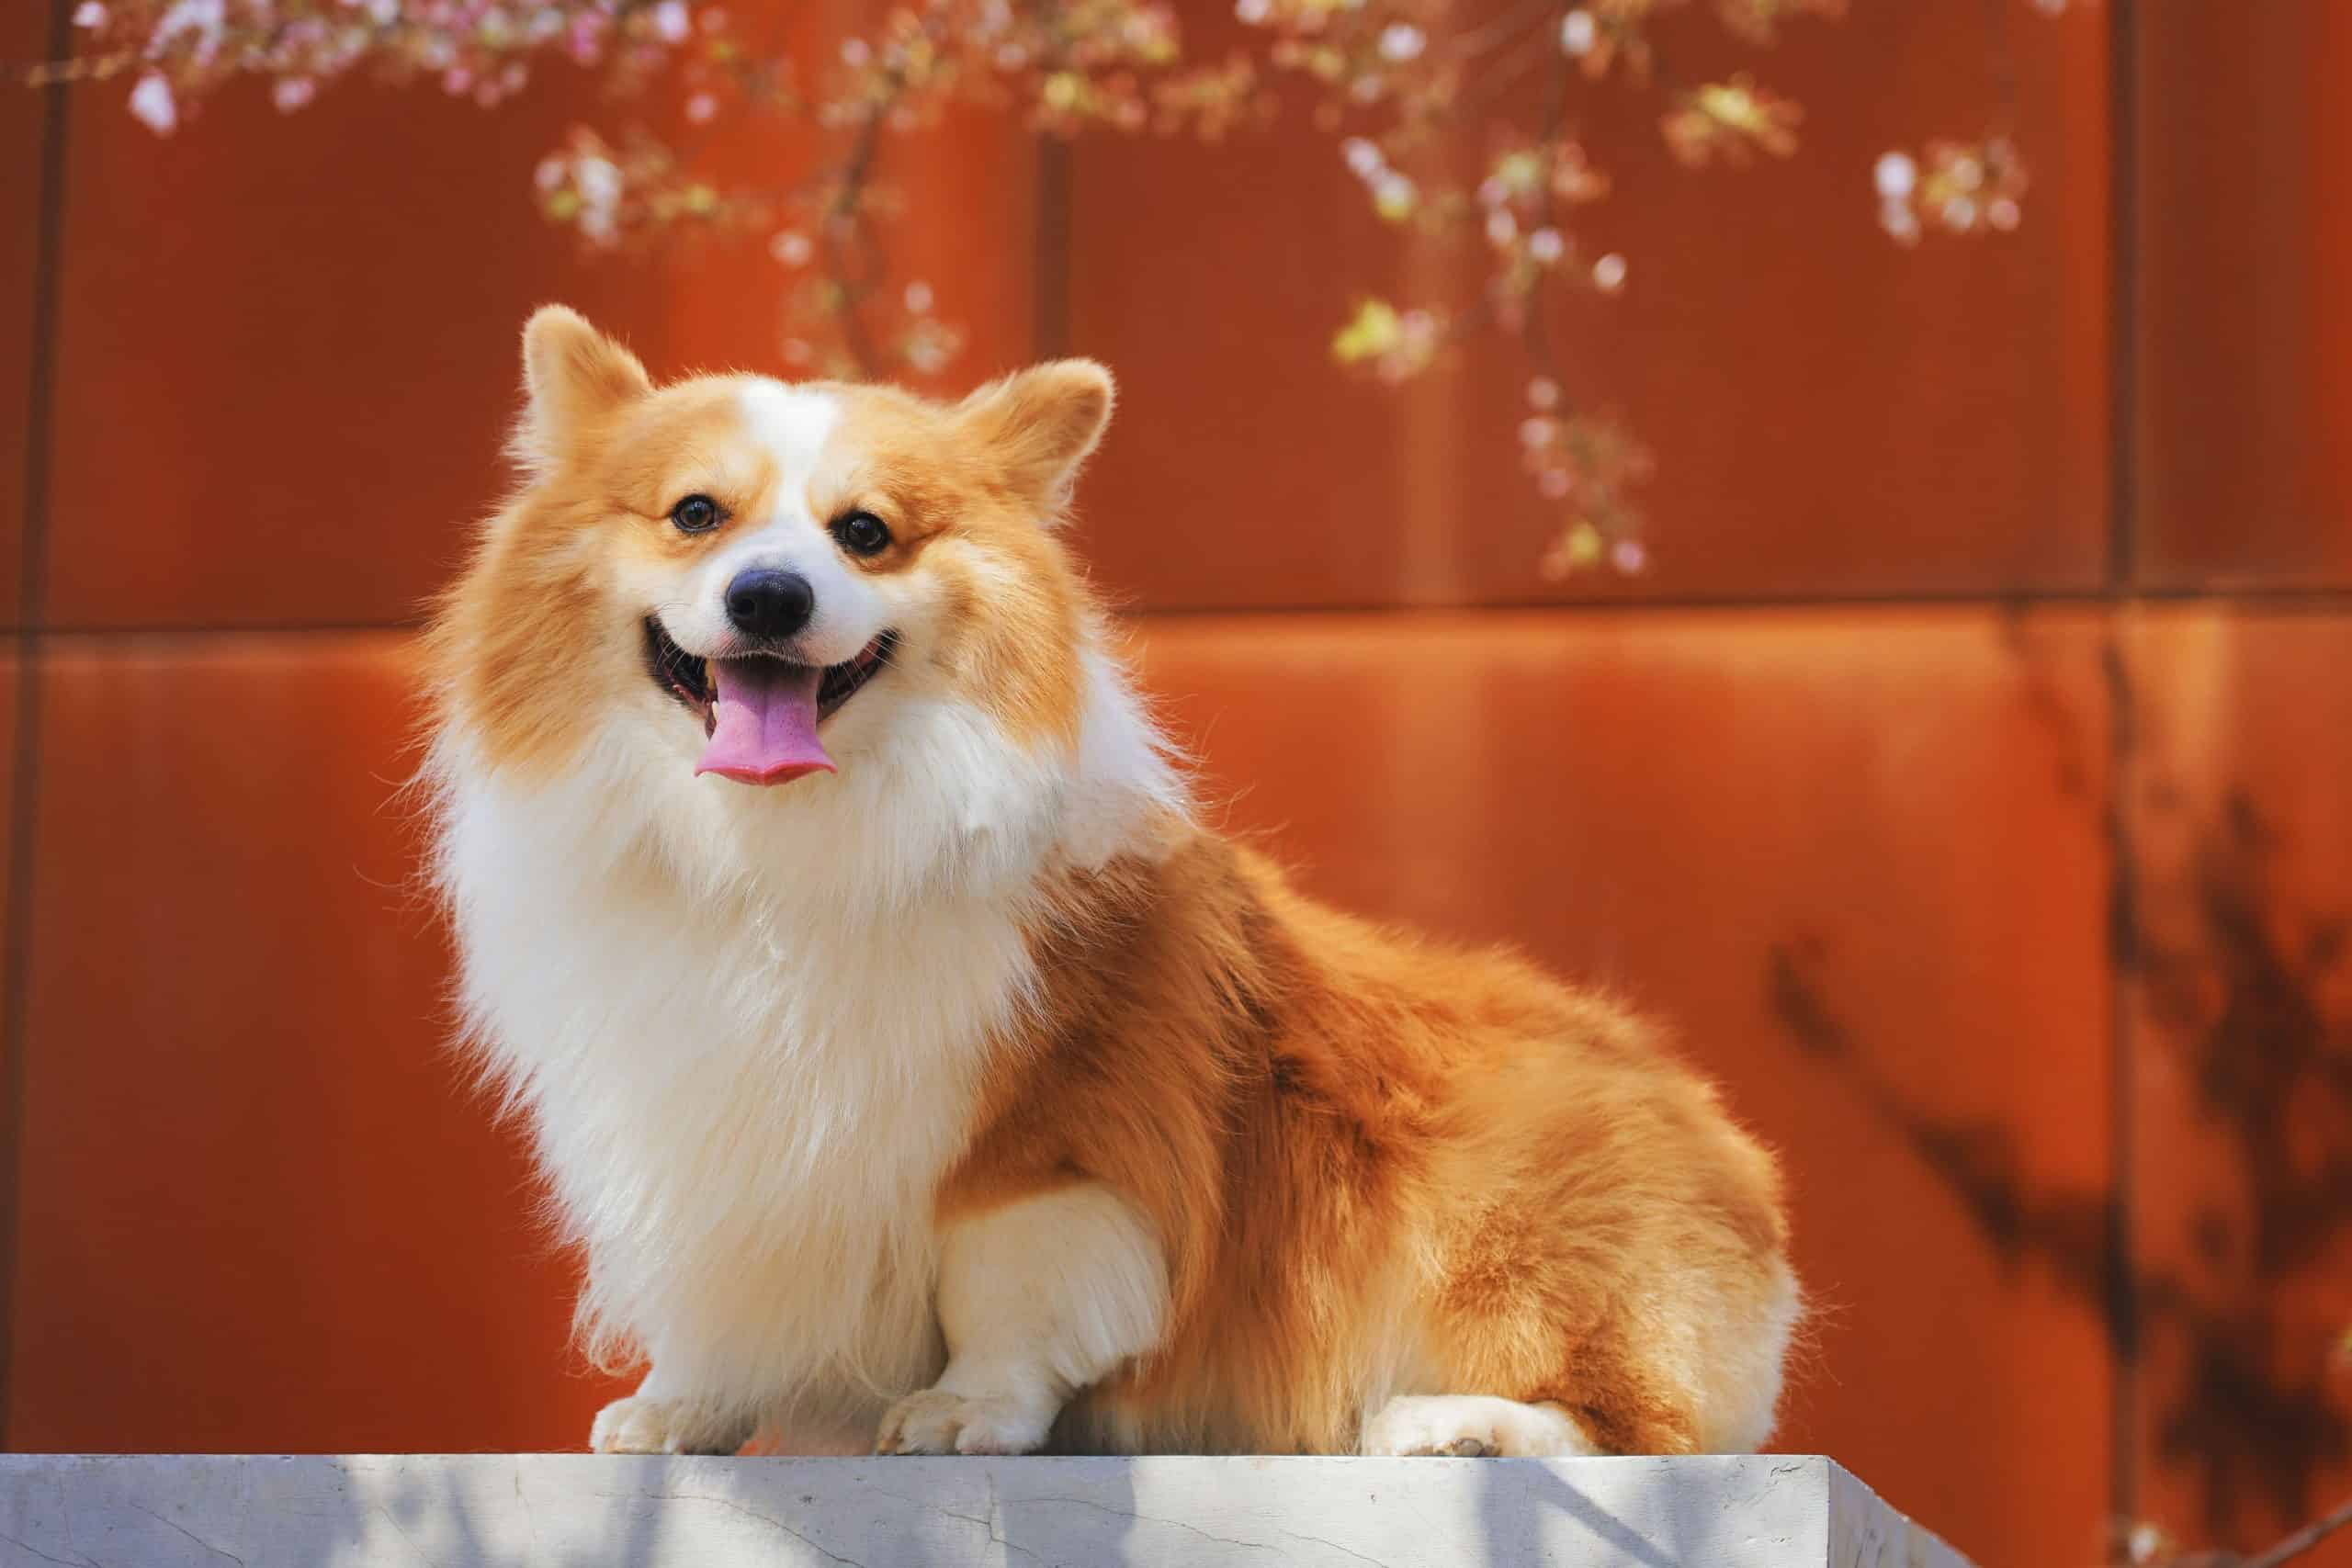 Corgi stands elevated in front of orange background.